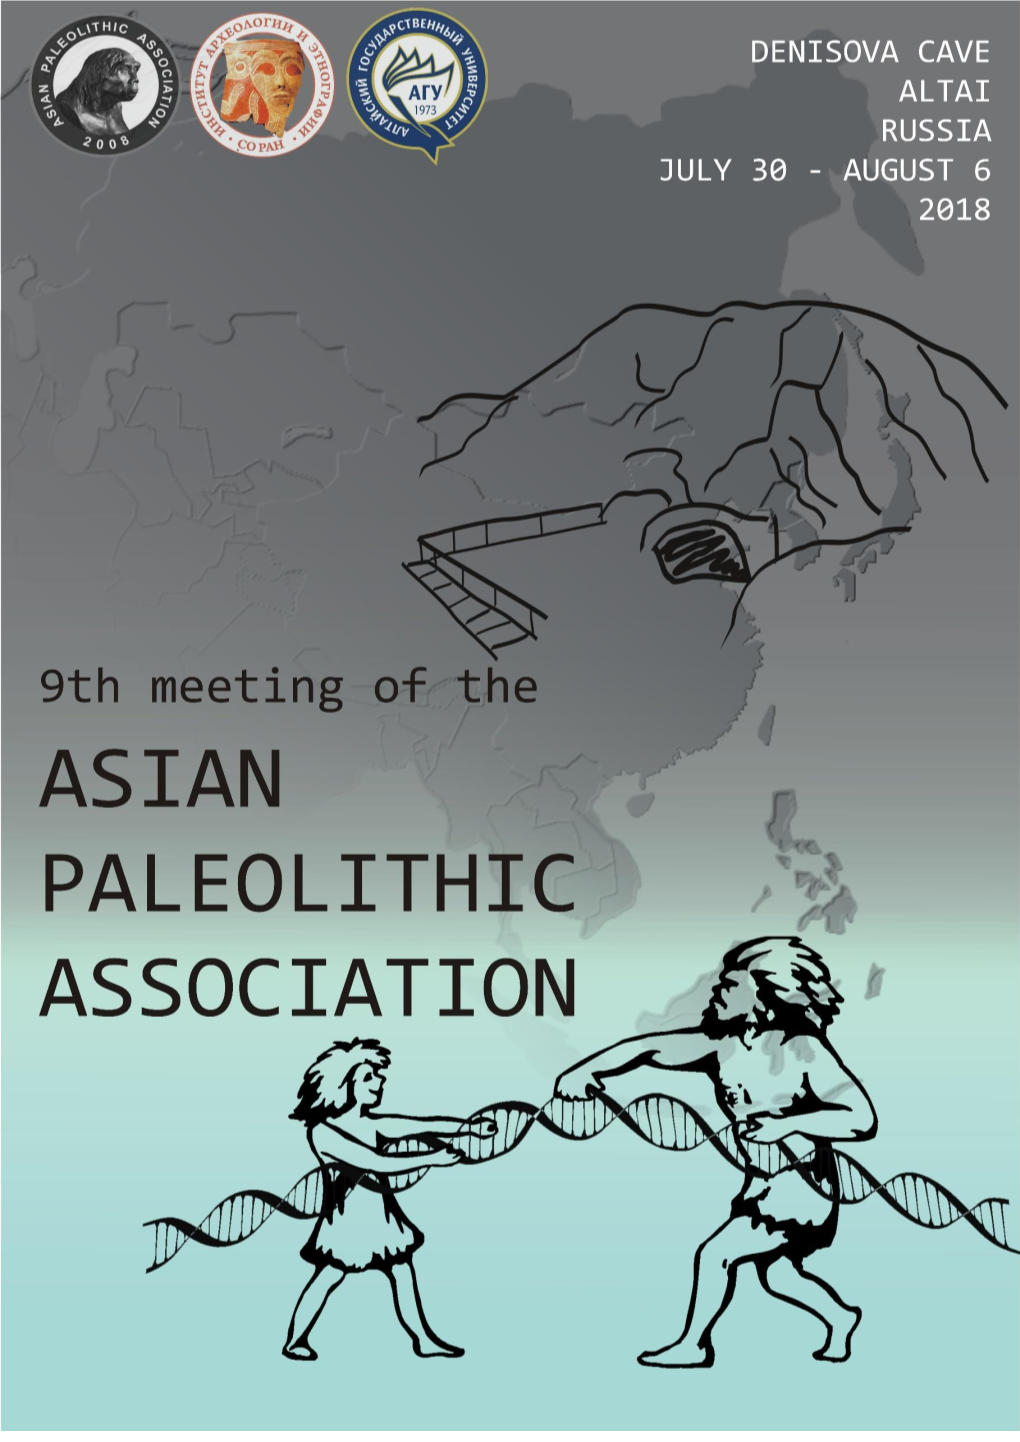 Proceeding of the the Asian Paleolithic Association: 9Th Annual Meeting (Denisova Cave, Altai, Russia) July 30 - August 6, 2018